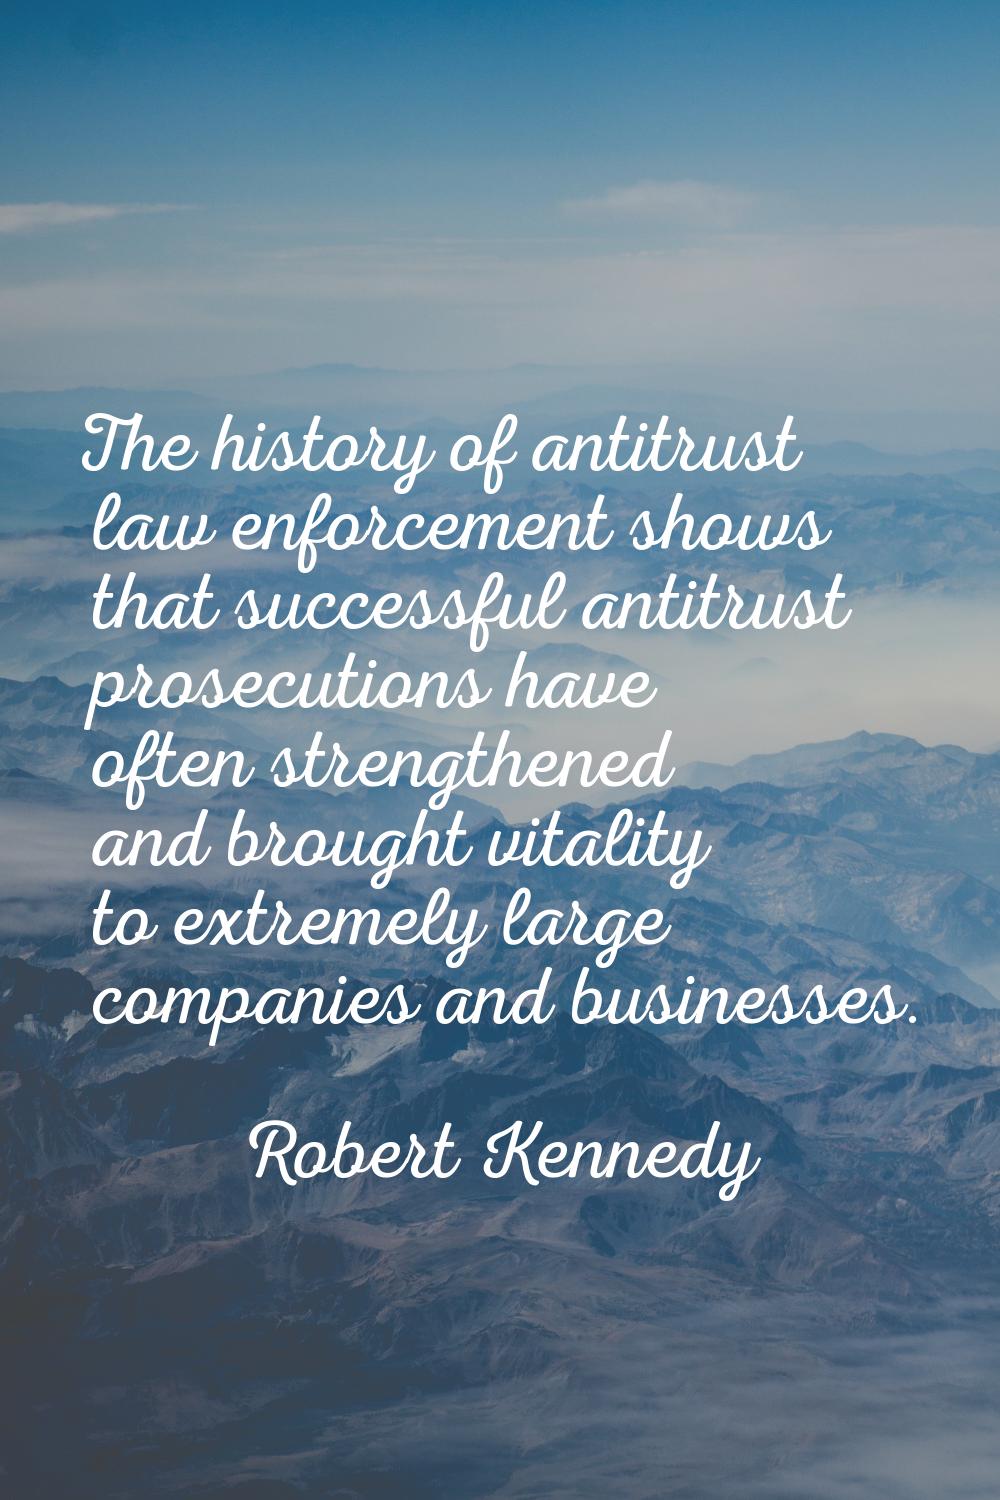 The history of antitrust law enforcement shows that successful antitrust prosecutions have often st